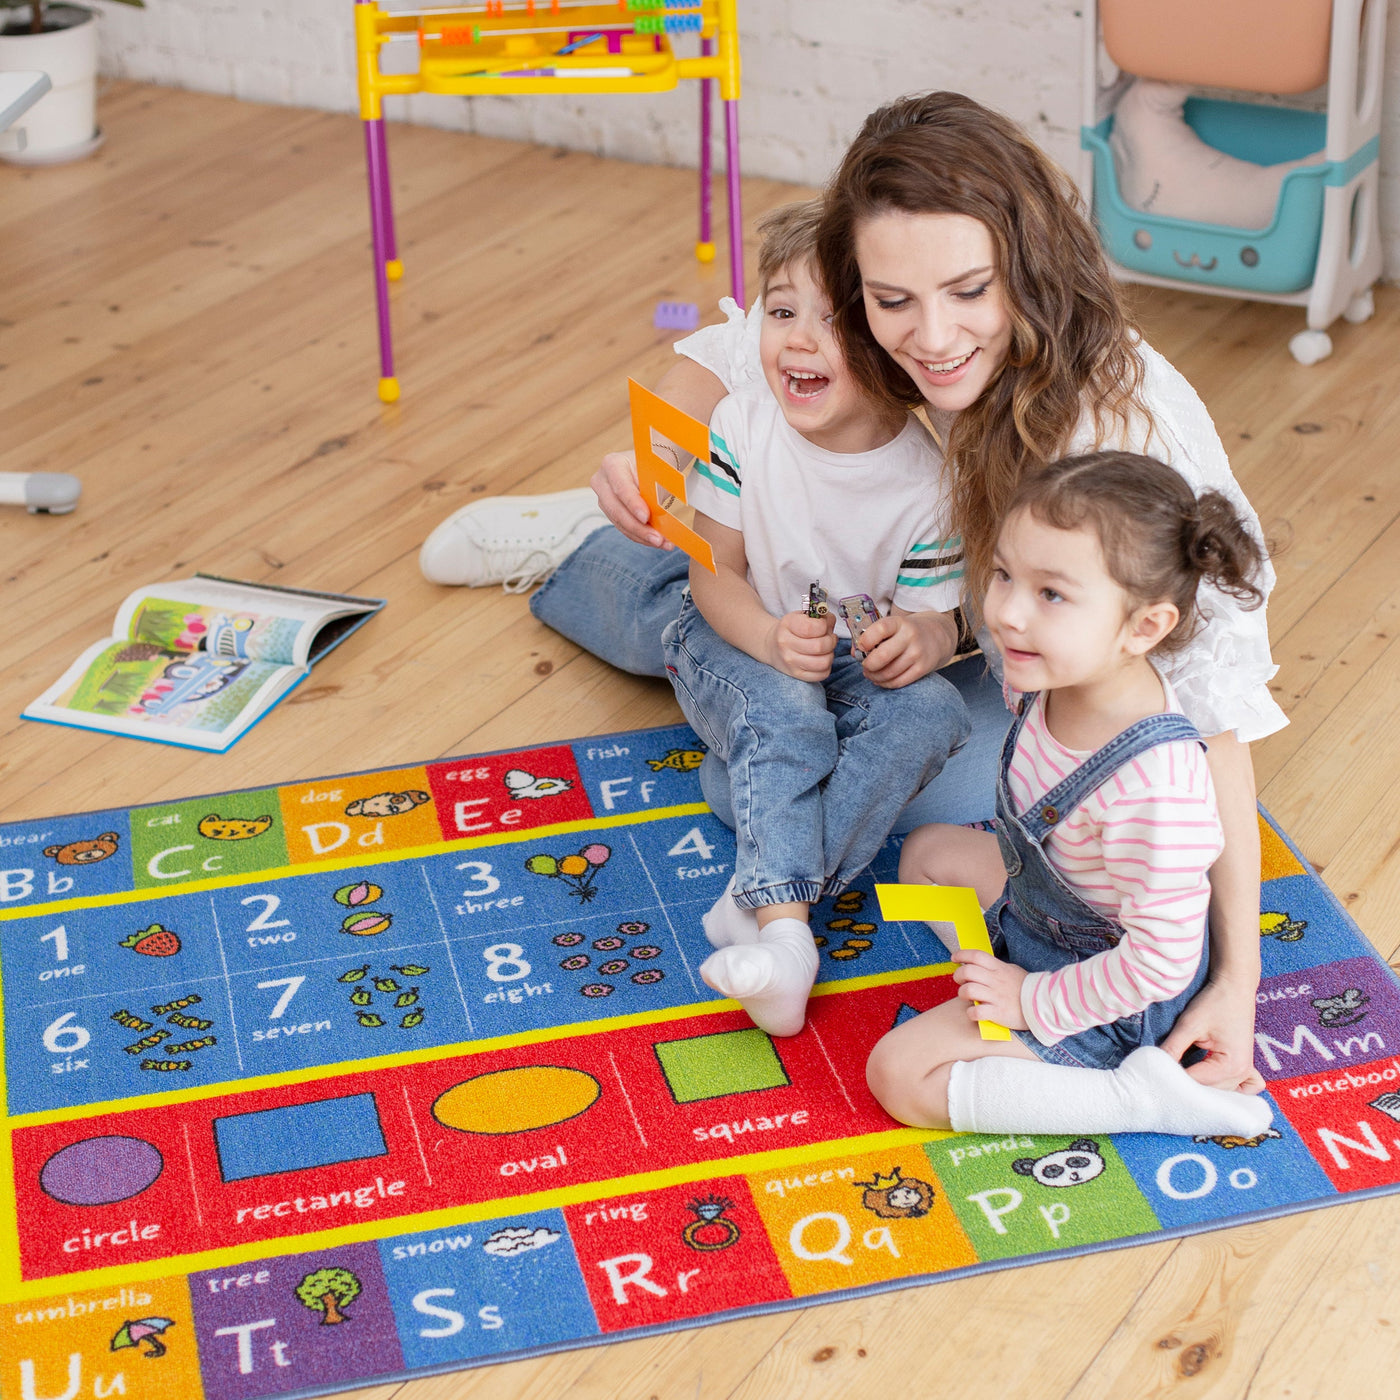 KIDS ABC NUMBERS SHAPES CLASSROOM PLAYROOM RUG - KC CUBS